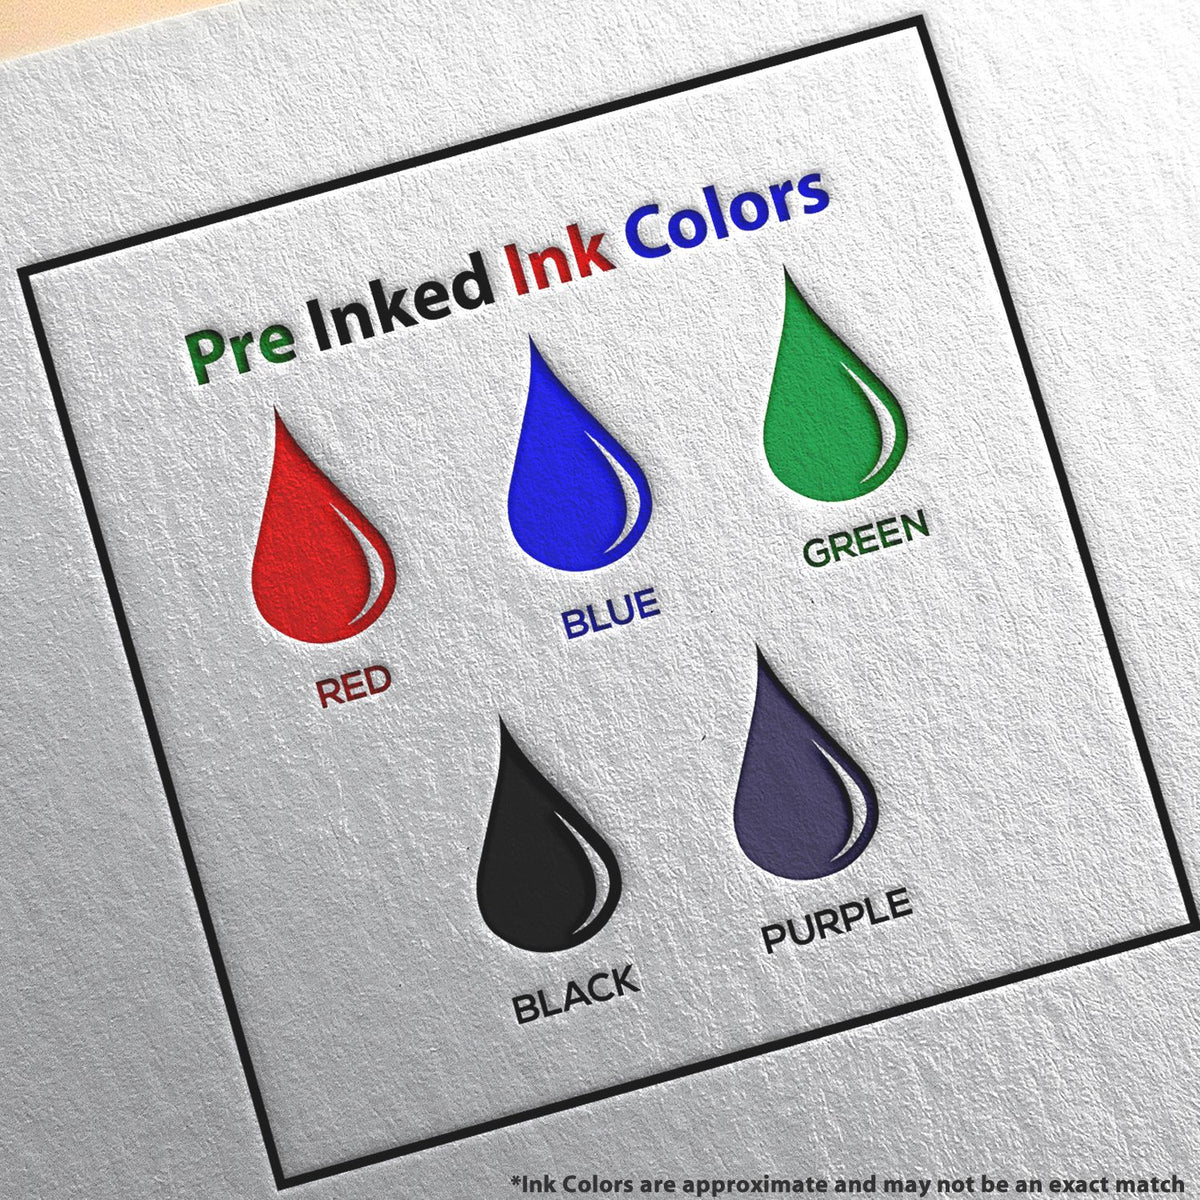 A picture showing the different ink colors or hues available for the Slim Pre-Inked Rectangular Notary Stamp for Indiana product.